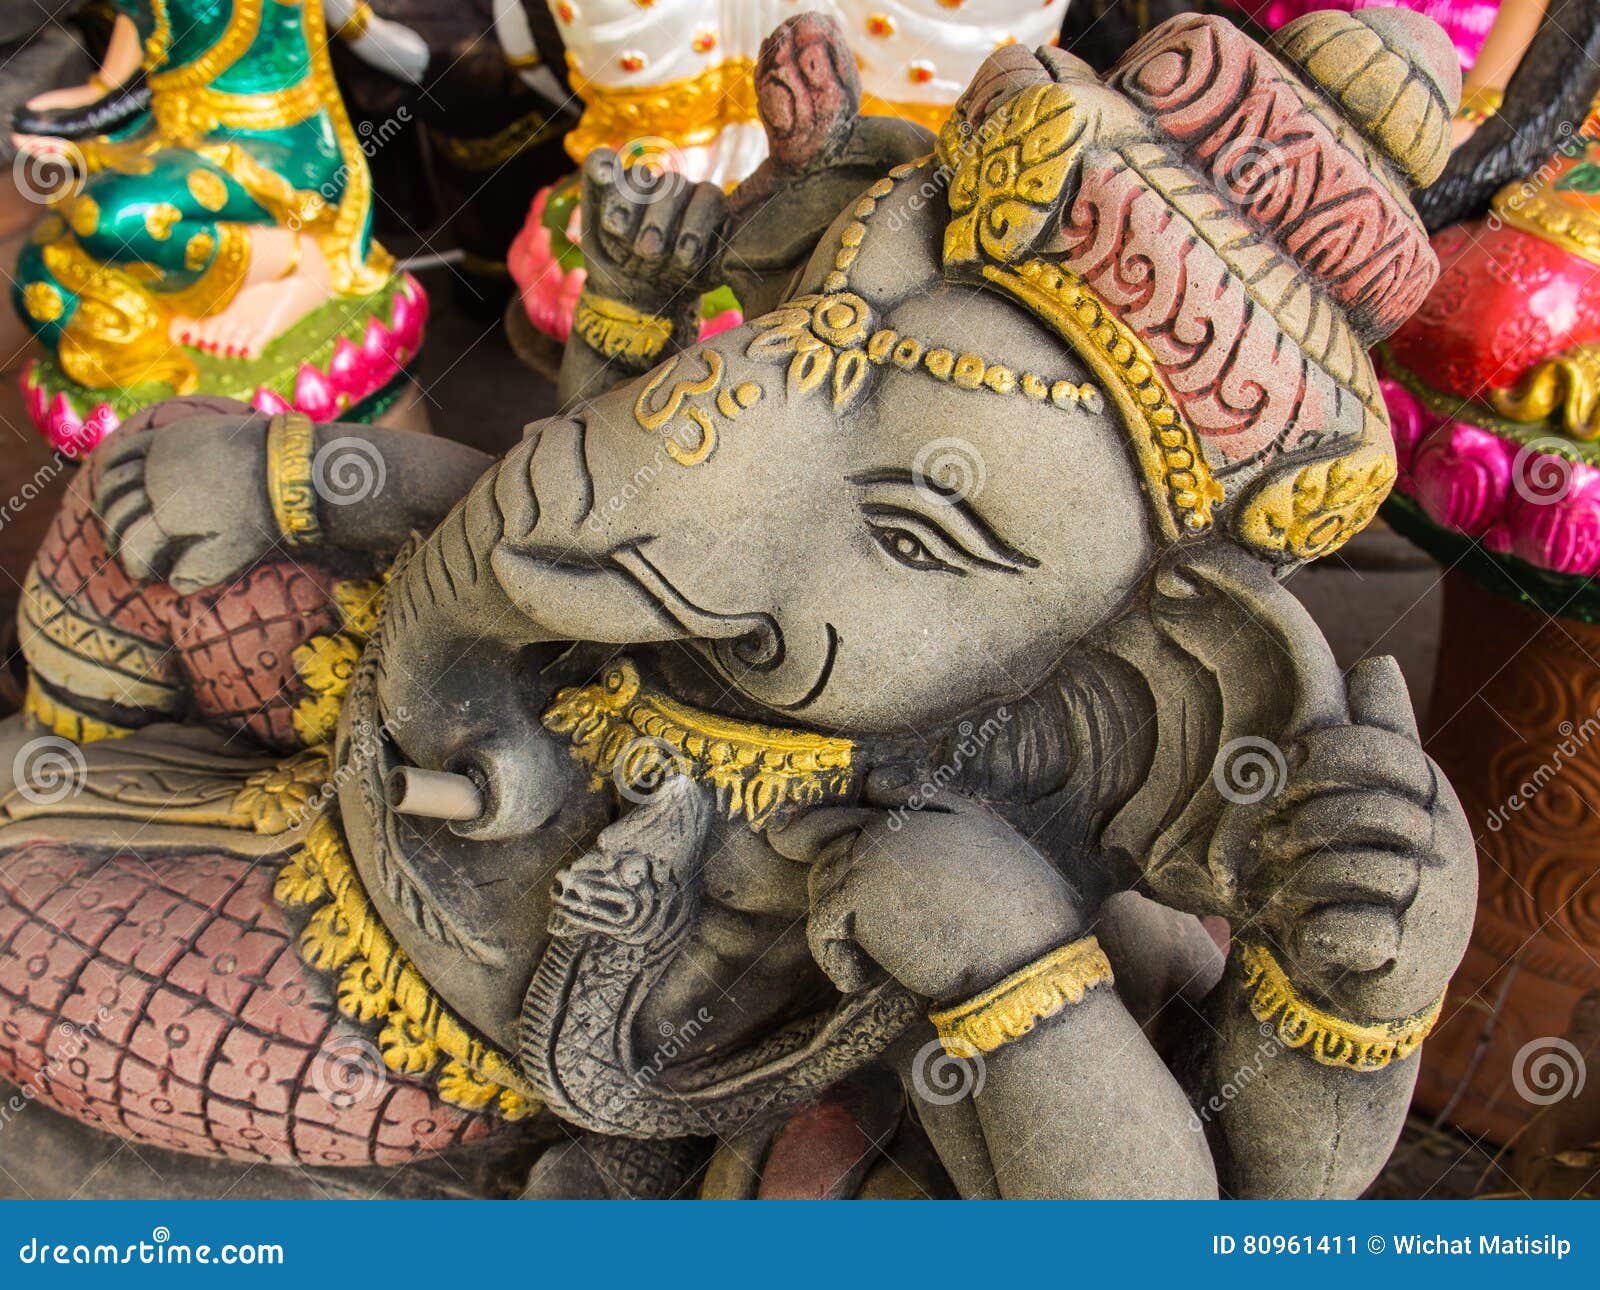 Ganesh Statues in Different Postures Stock Image - Image of gate ...